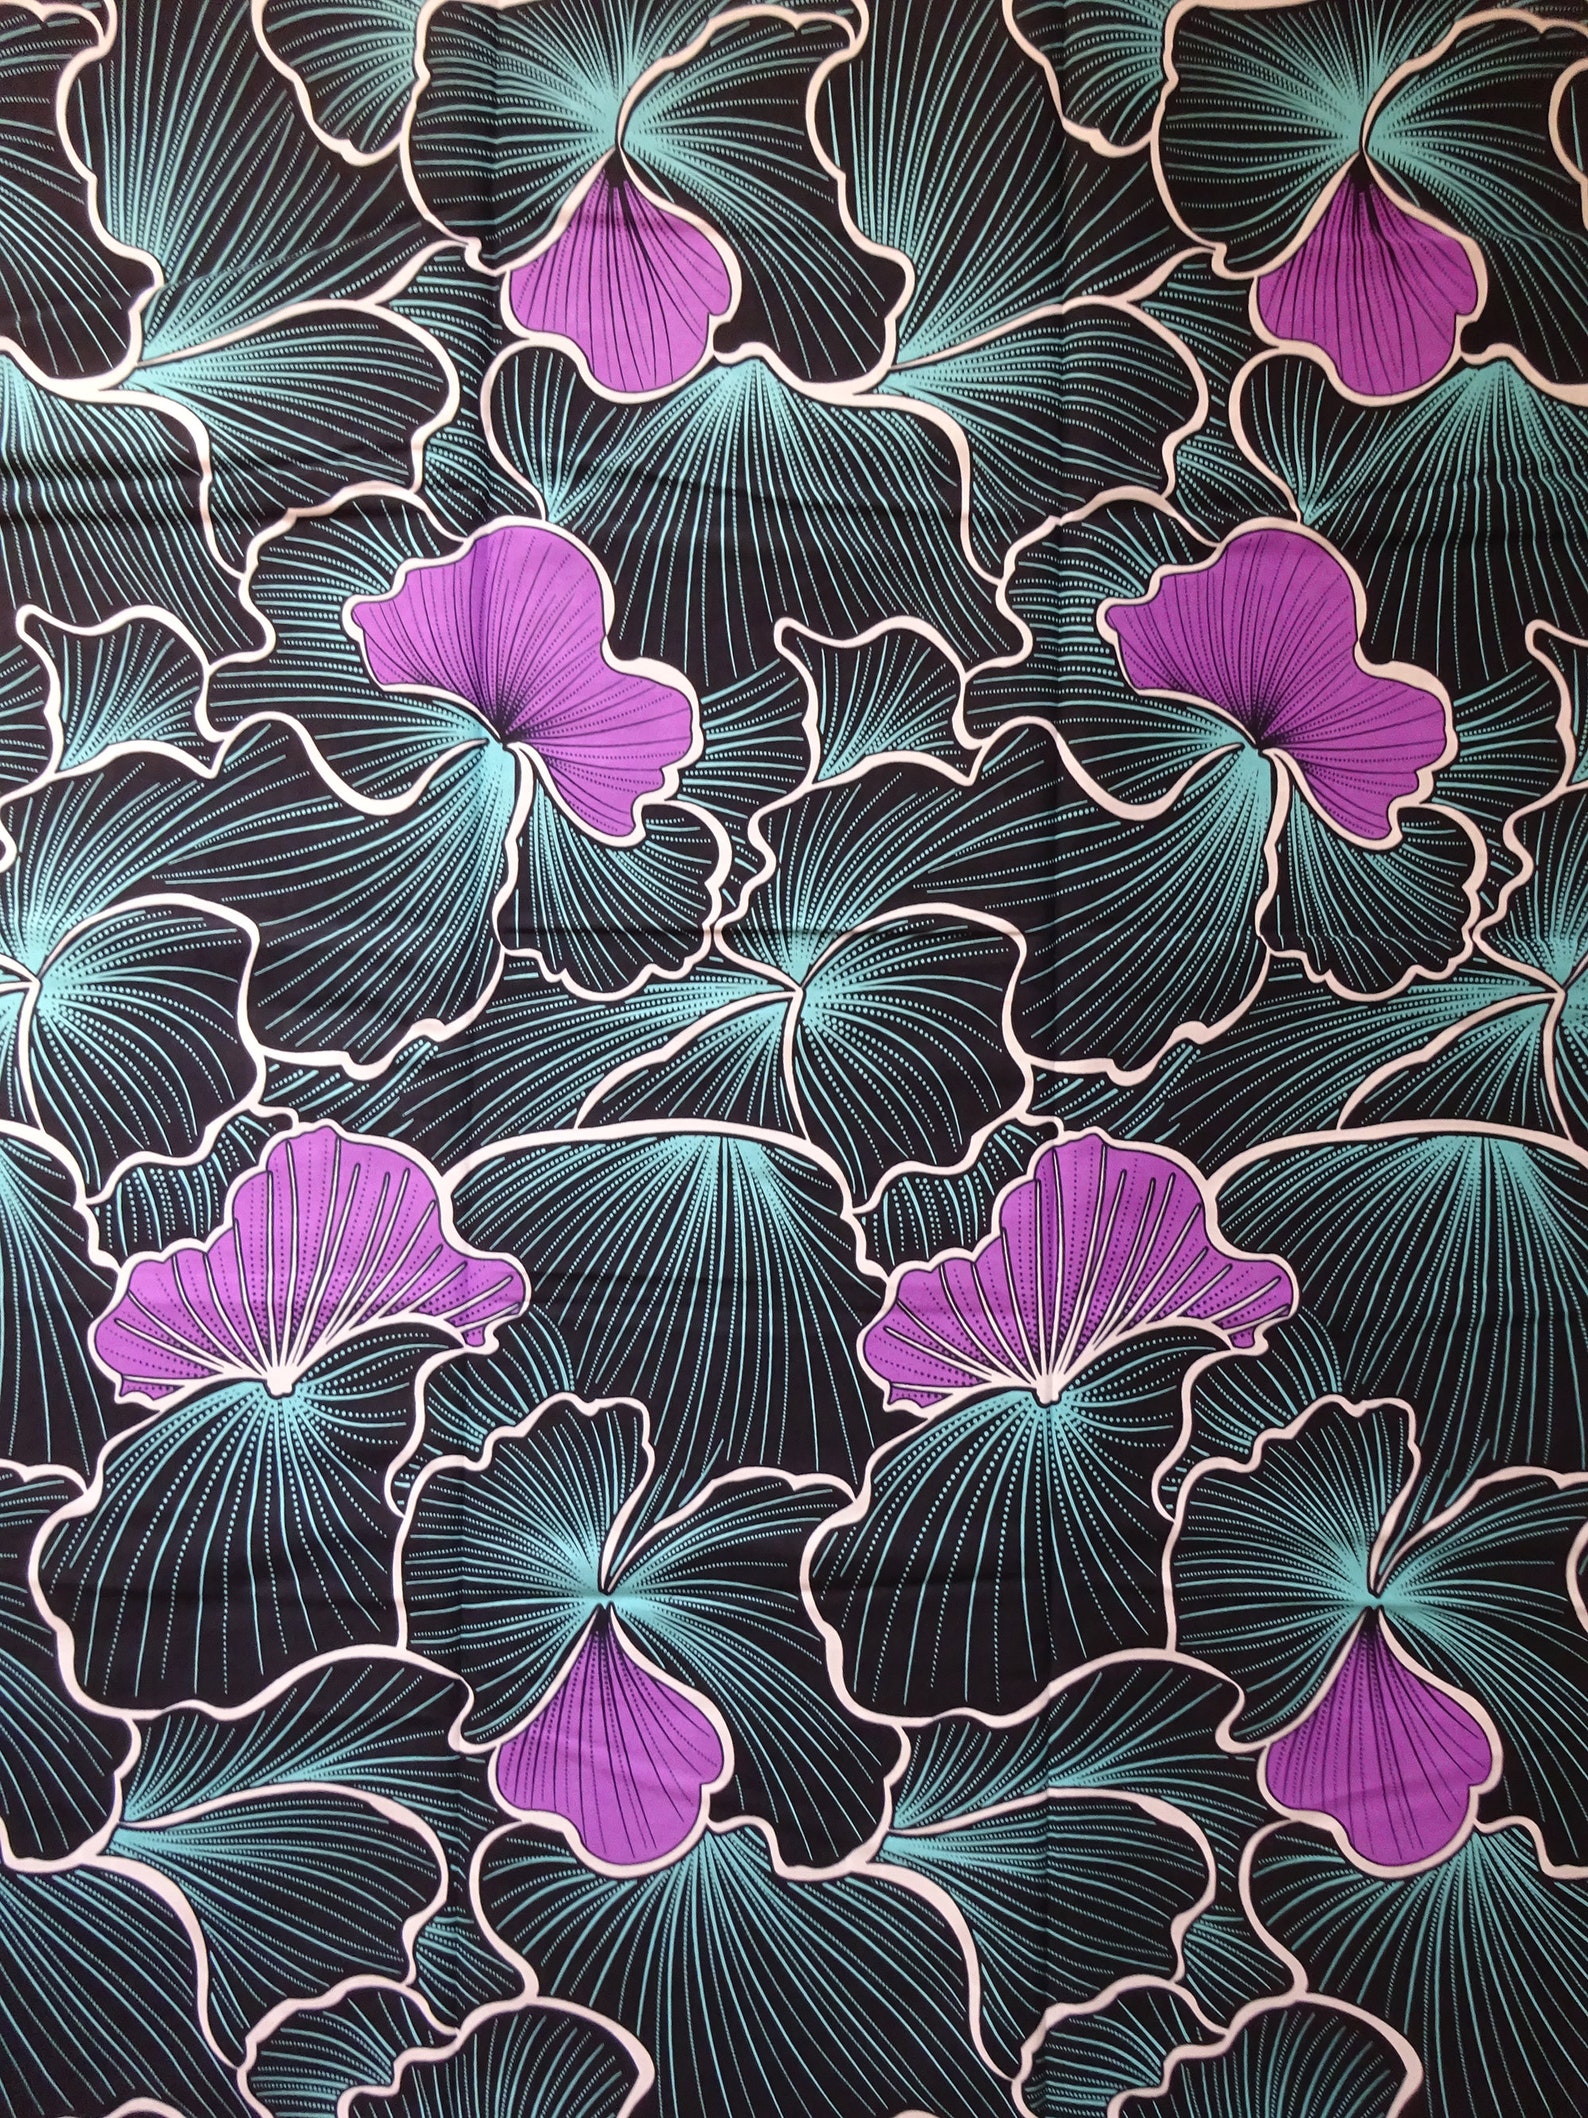 Black and purple African print Fabric floral African fabric by | Etsy